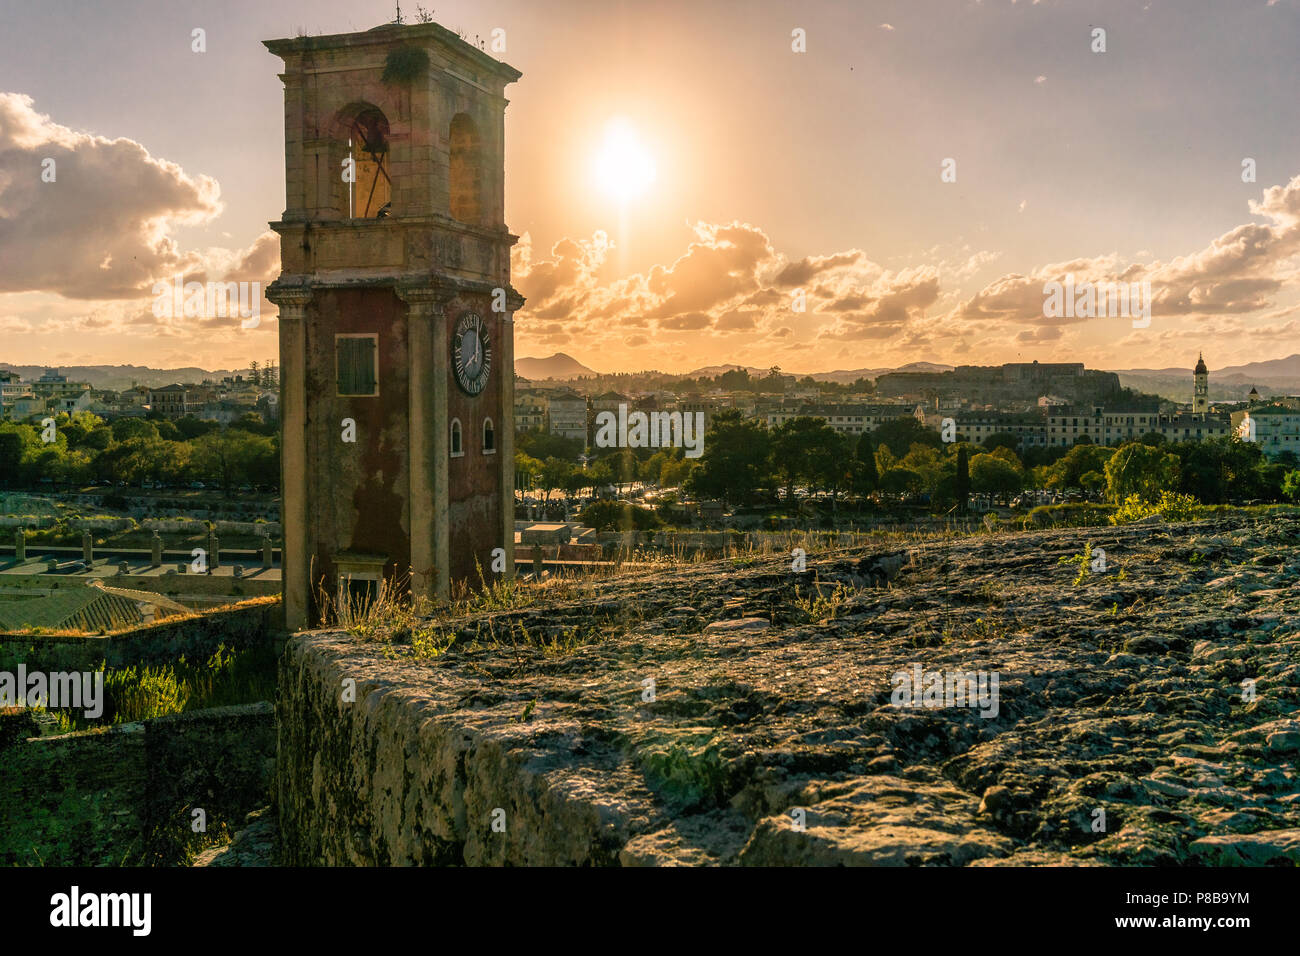 View of a bell tower, Old Venetian Fortress, kerkira, Corfu Stock Photo